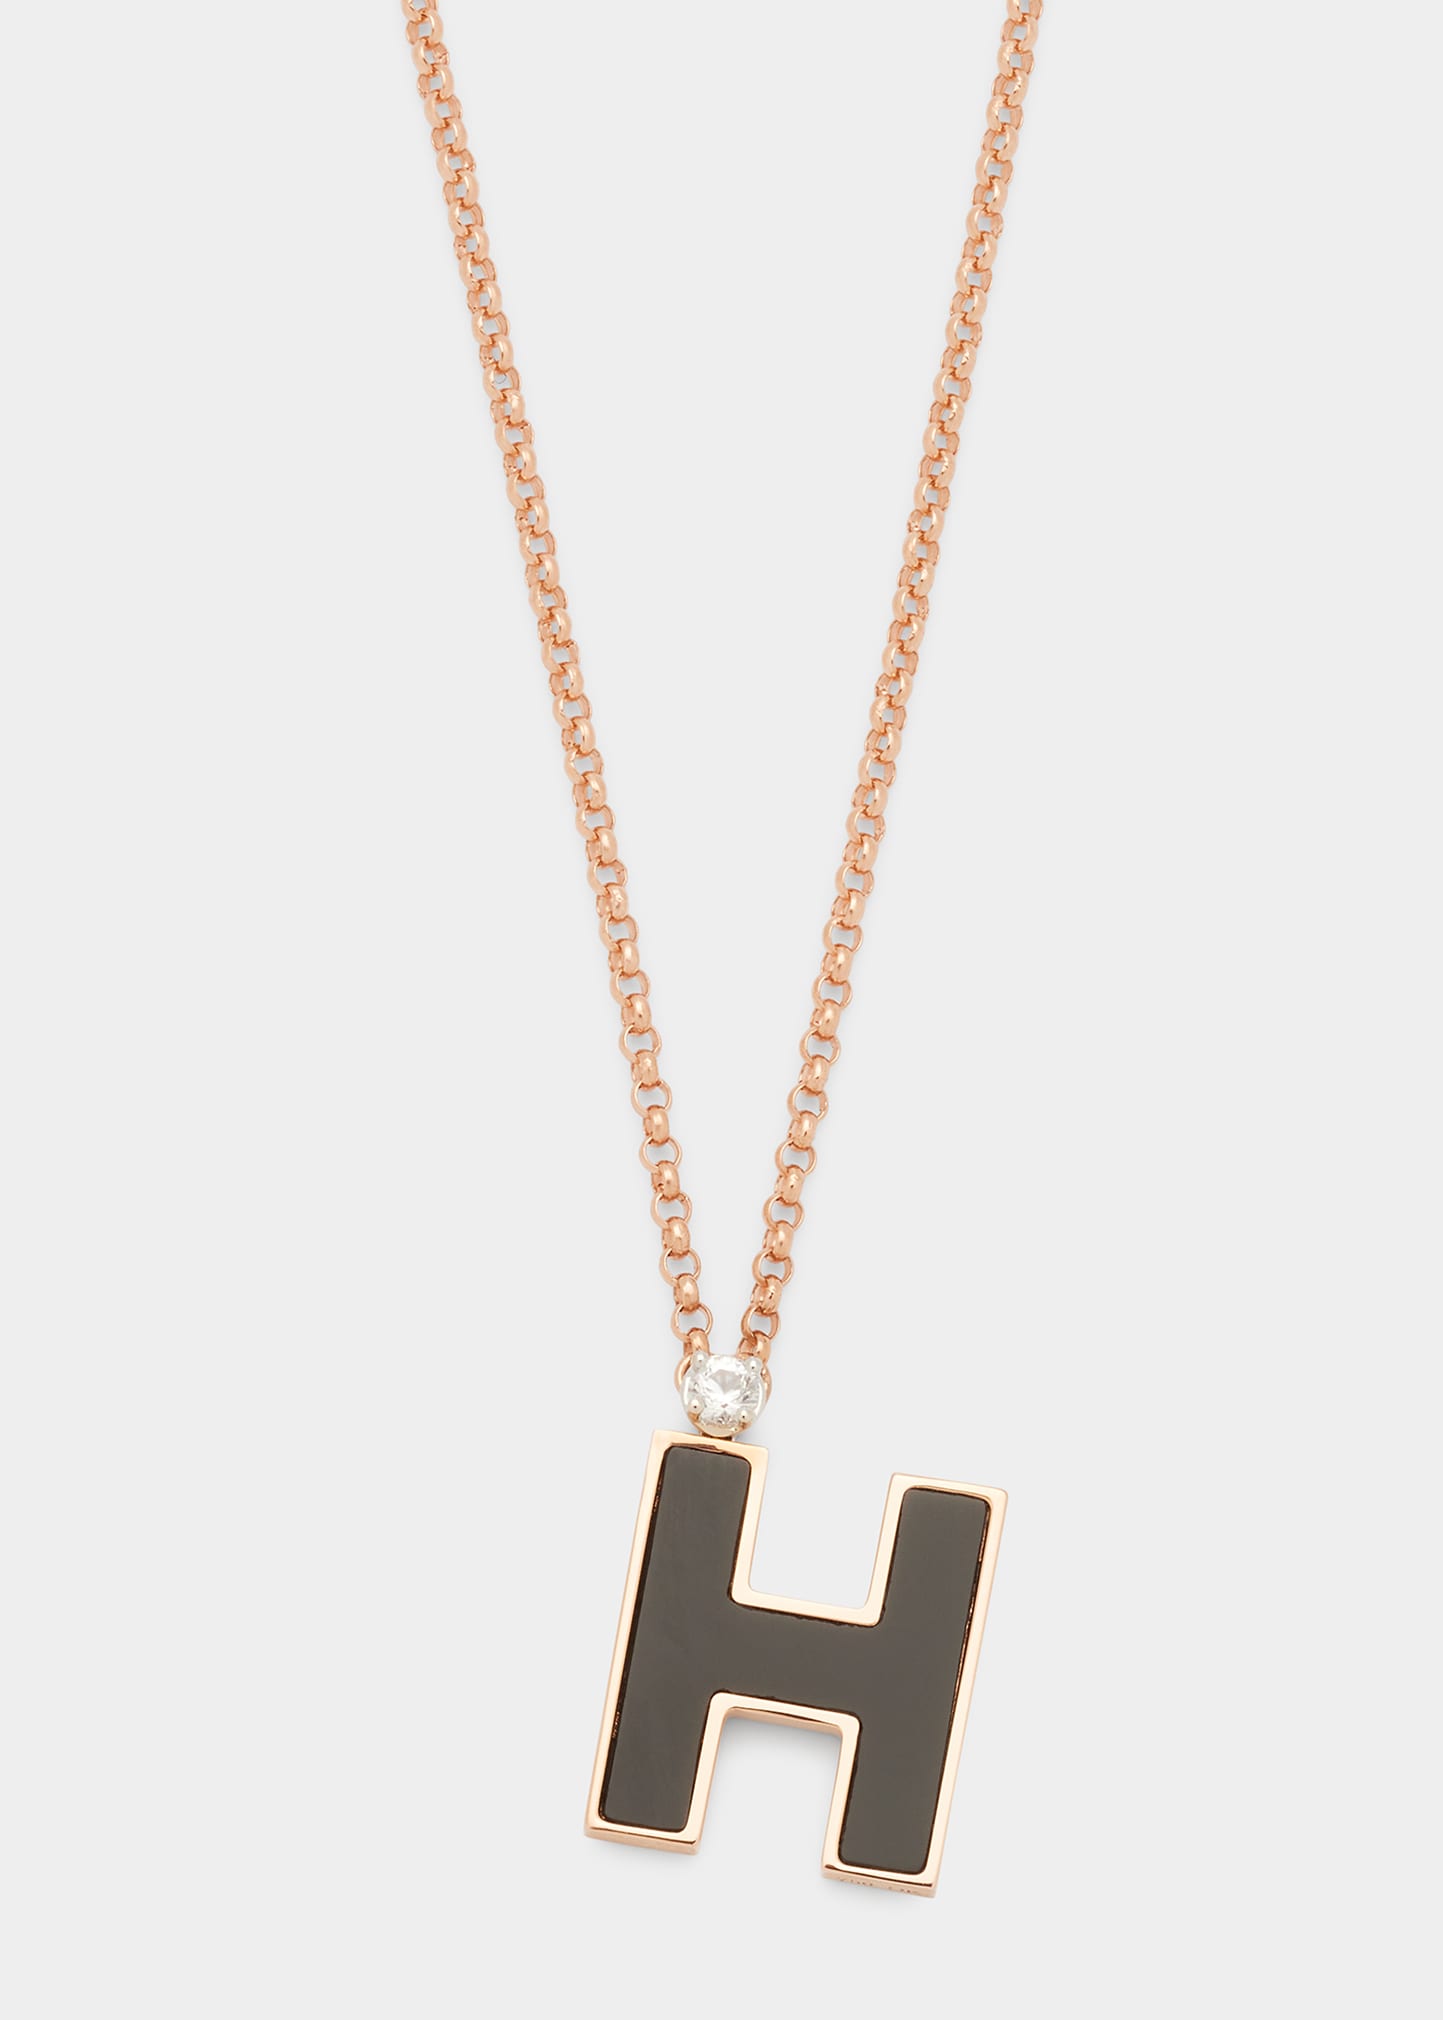 Rose Gold 'H' Letter Charm Necklace with Onyx and White Sapphire